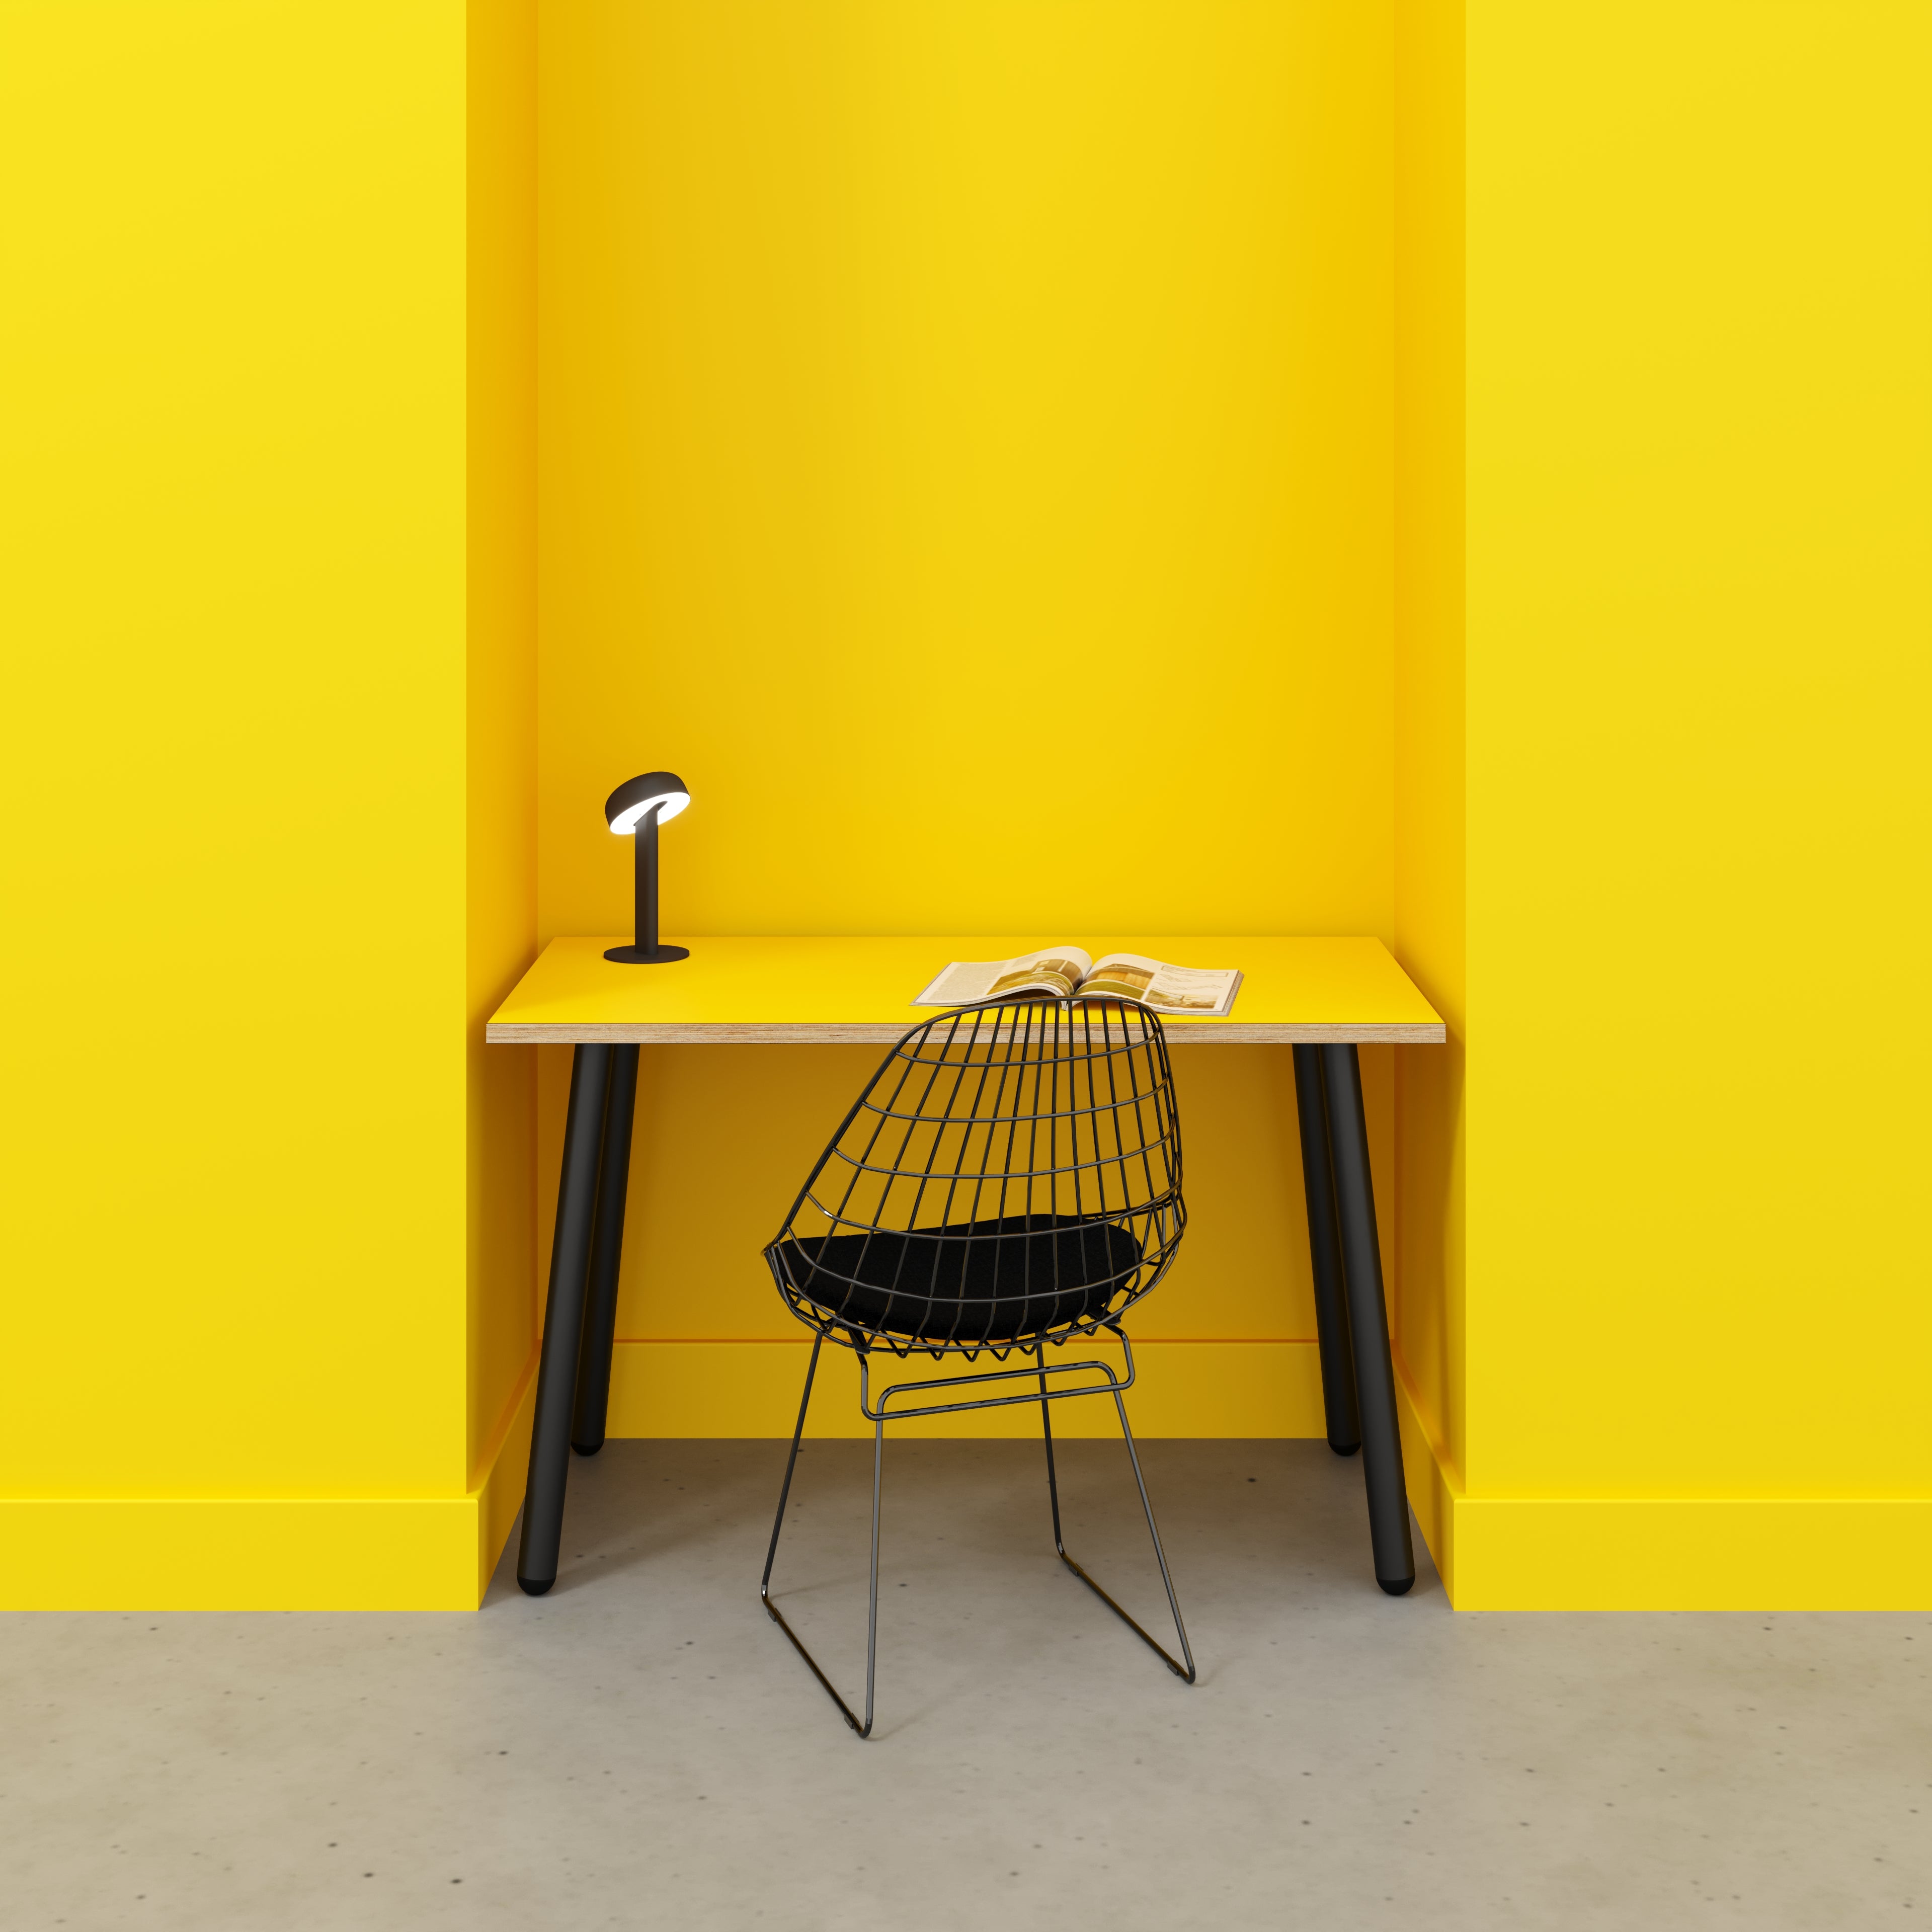 Desk with Black Round Single Pin Legs - Formica Chrome Yellow - 1200(w) x 600(d) x 735(h)